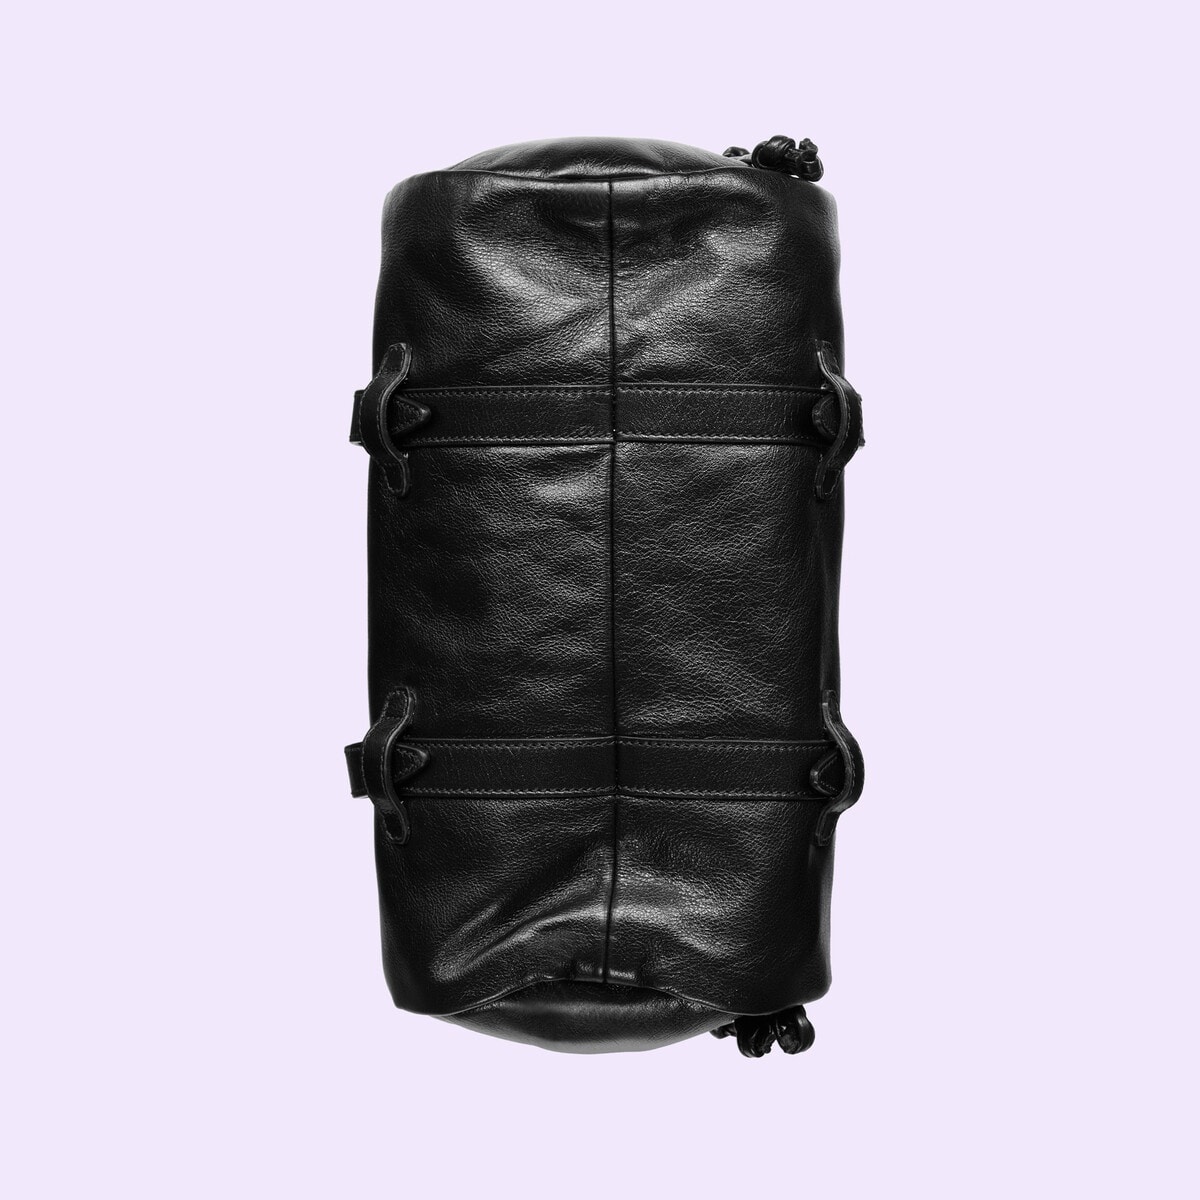 Backpack with tonal Double G in black leather